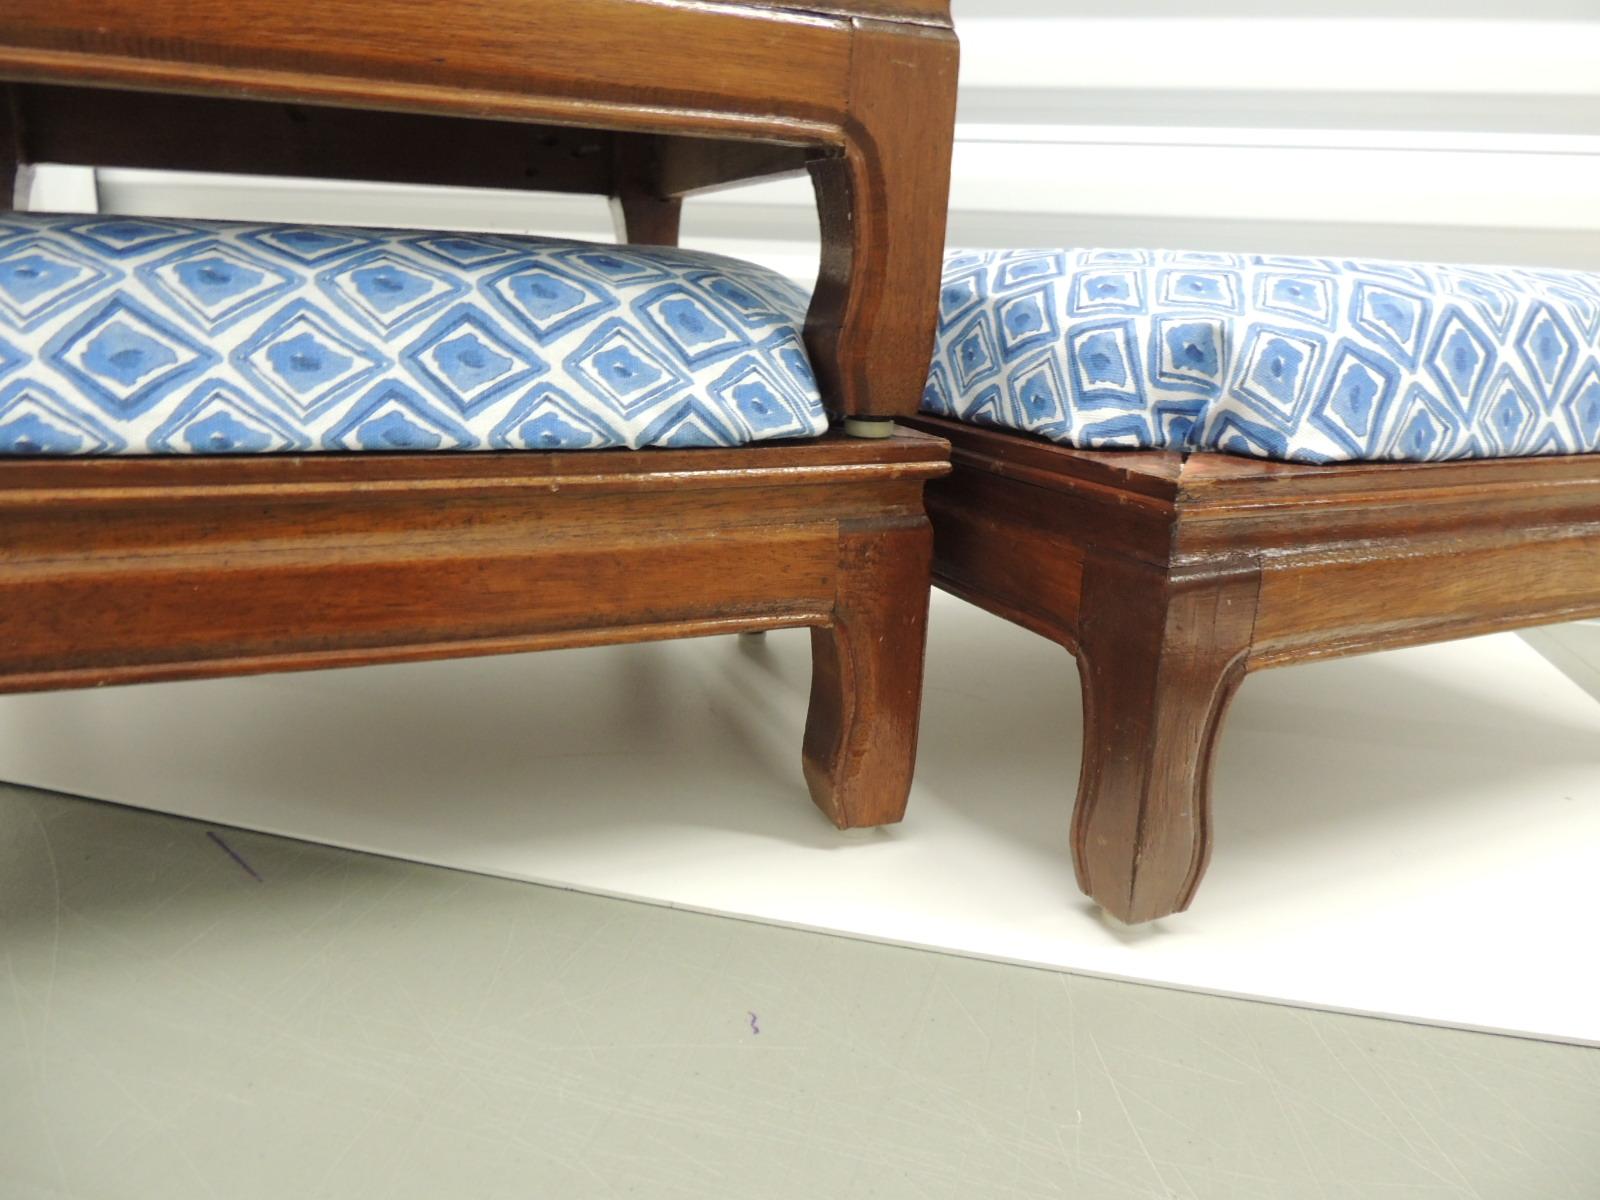 Hand-Crafted Vintage Set of (3) Square Nesting Ottoman/Stools Covered in Blue & White Fabric